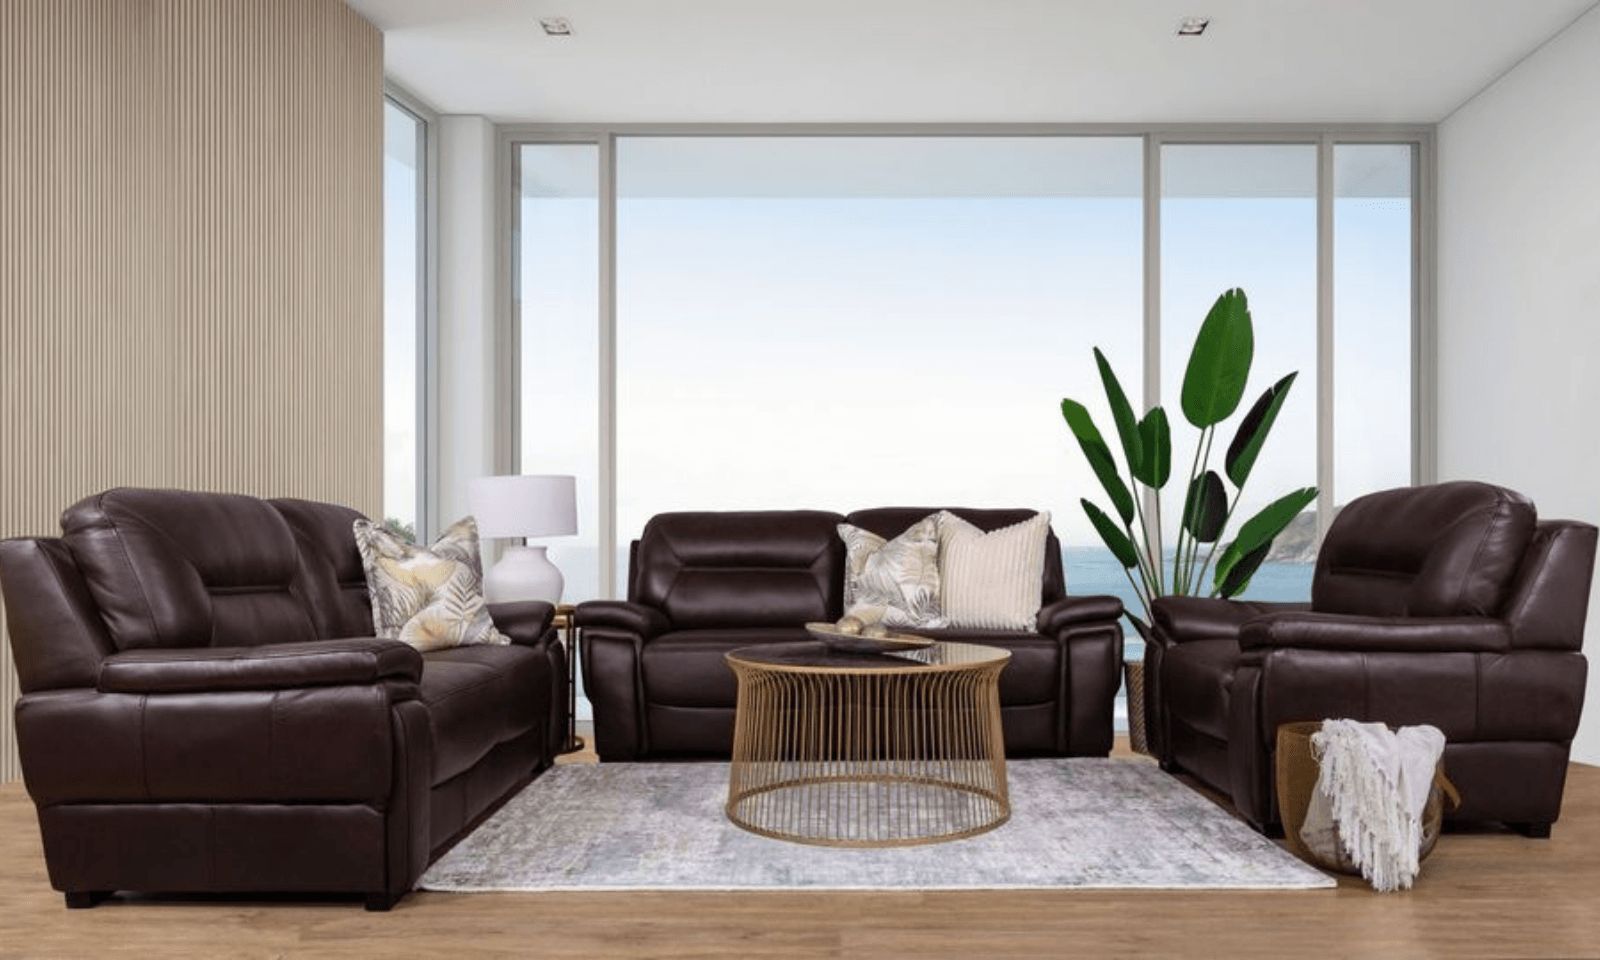 What you need to consider before buying a leather couch